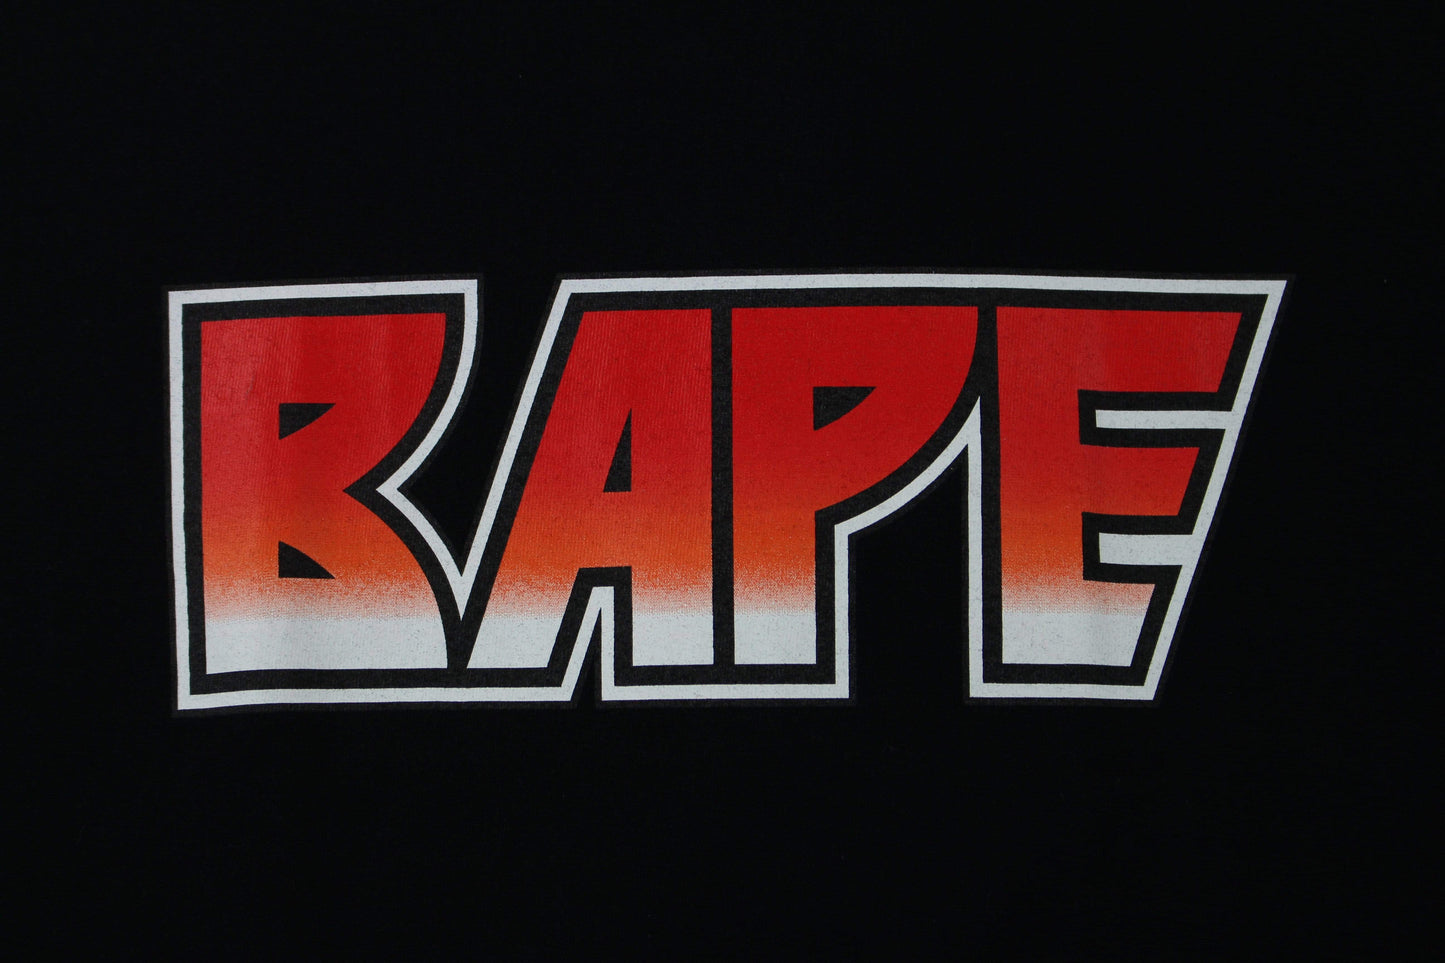 Bape Red Kiss Text Tee Black - SaruGeneral